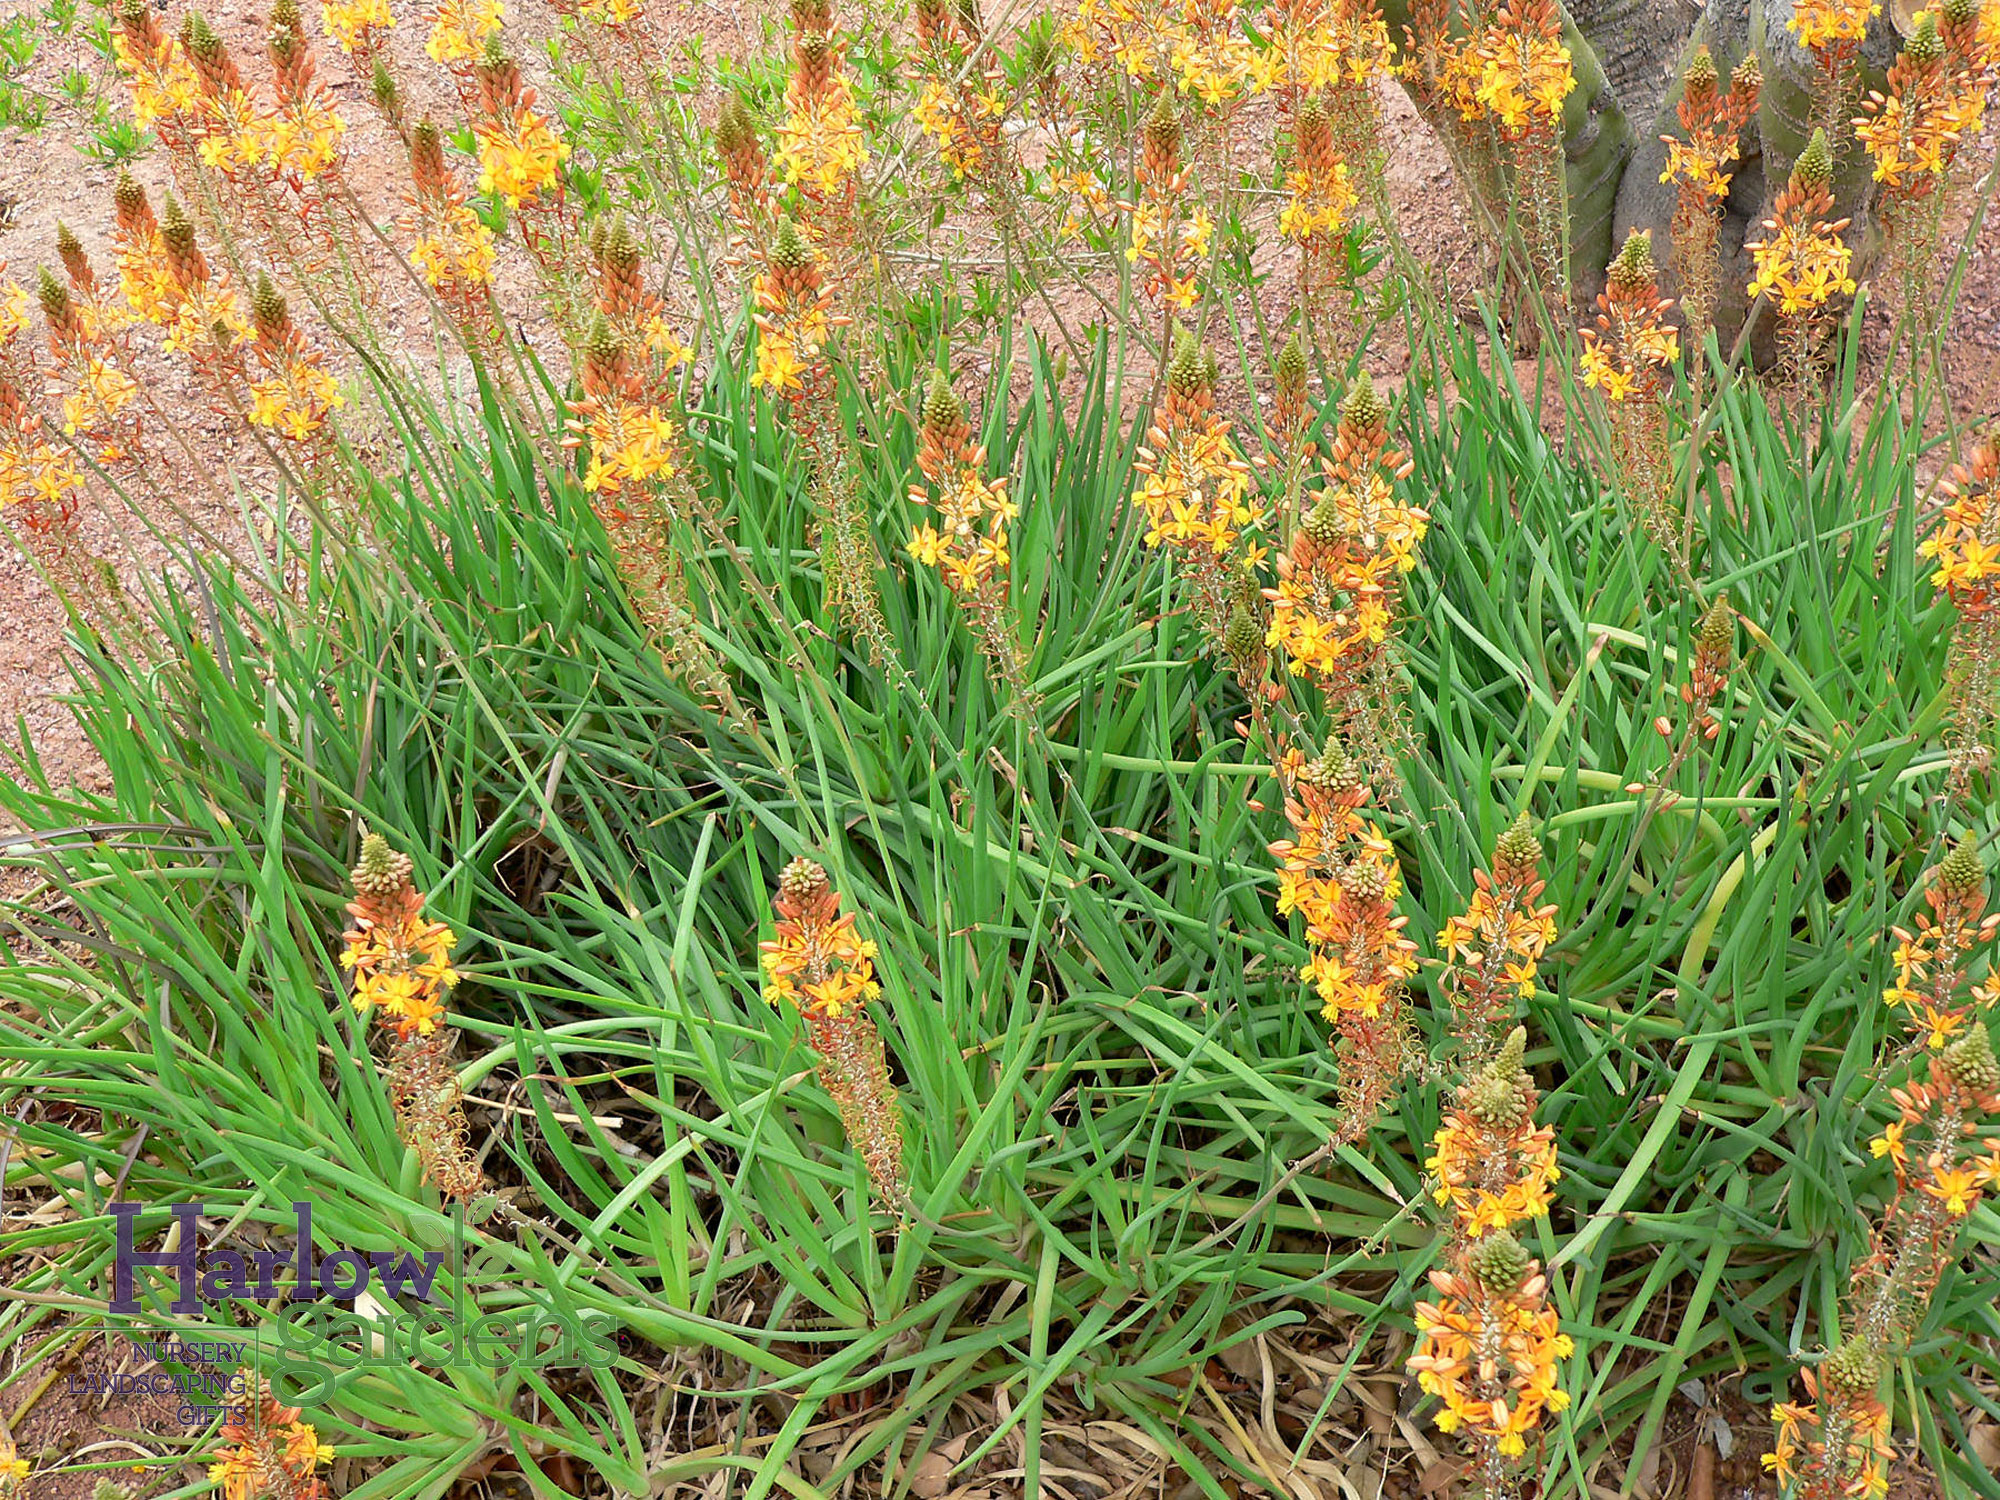 Bulbine for sale at Harlow Gardens Tucson.